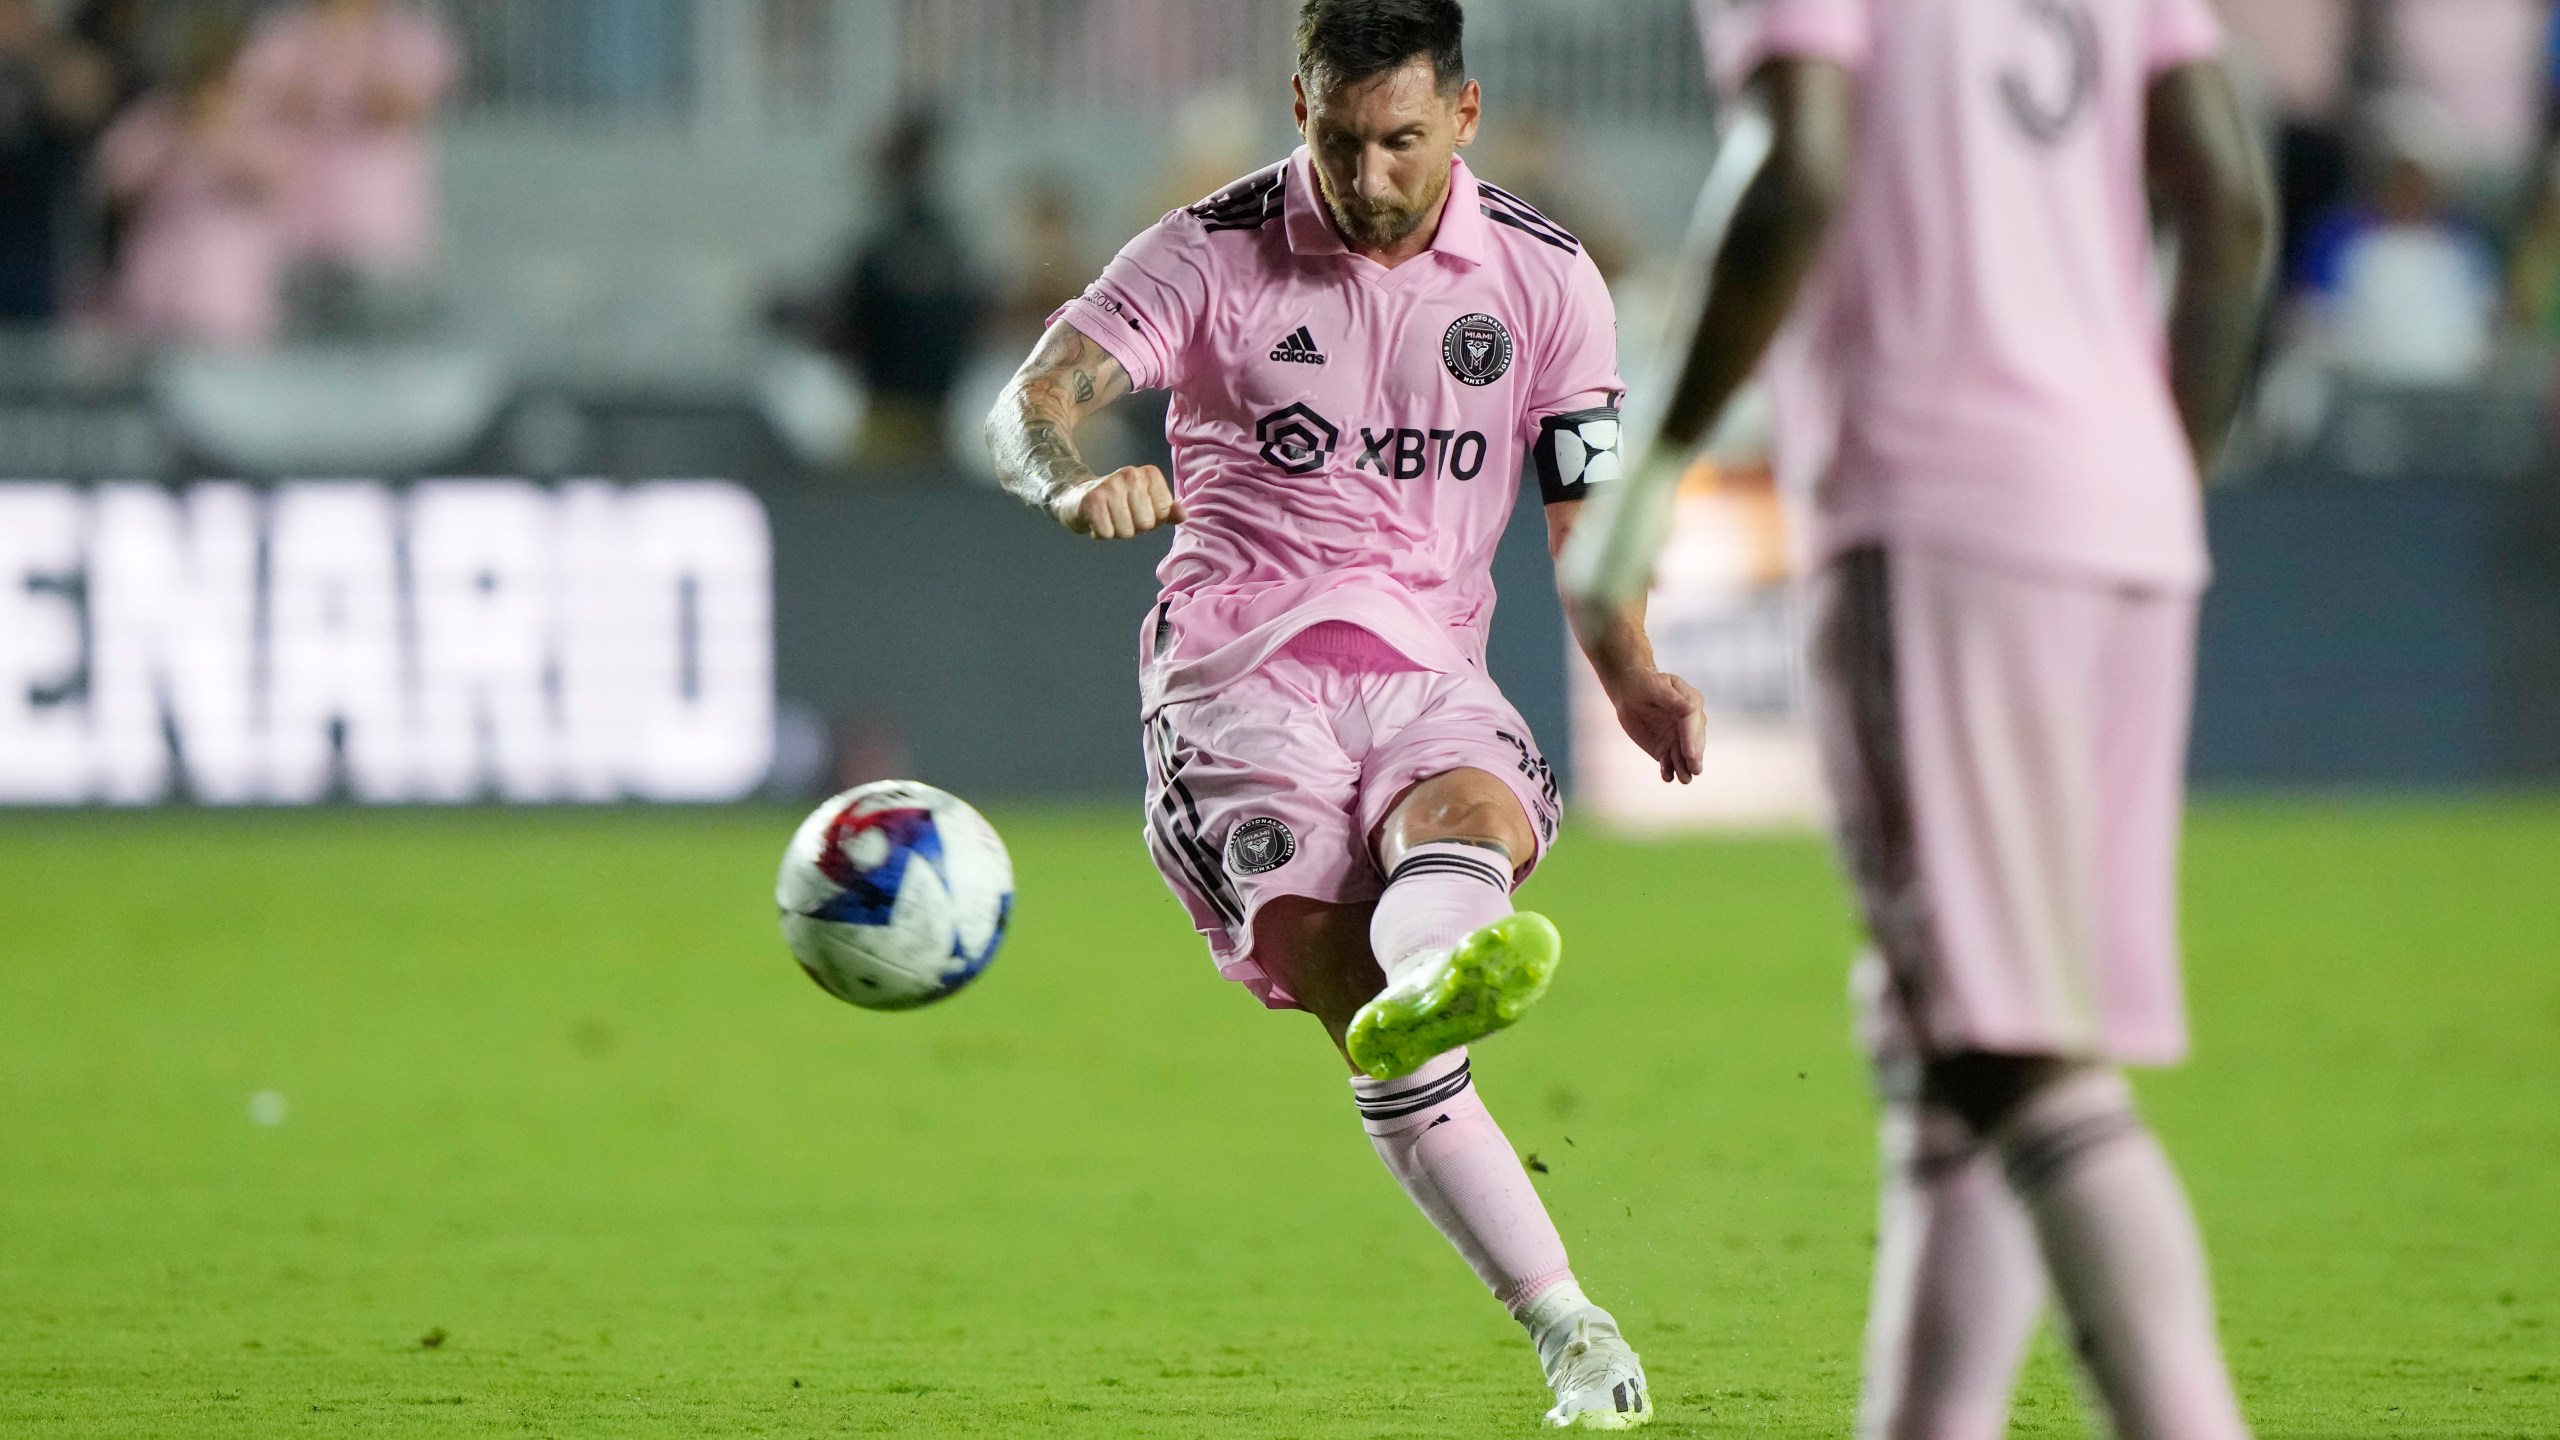 Lionel Messi Scores A Sensational Game Winning Goal On A Free Kick In His Inter Miami Debut